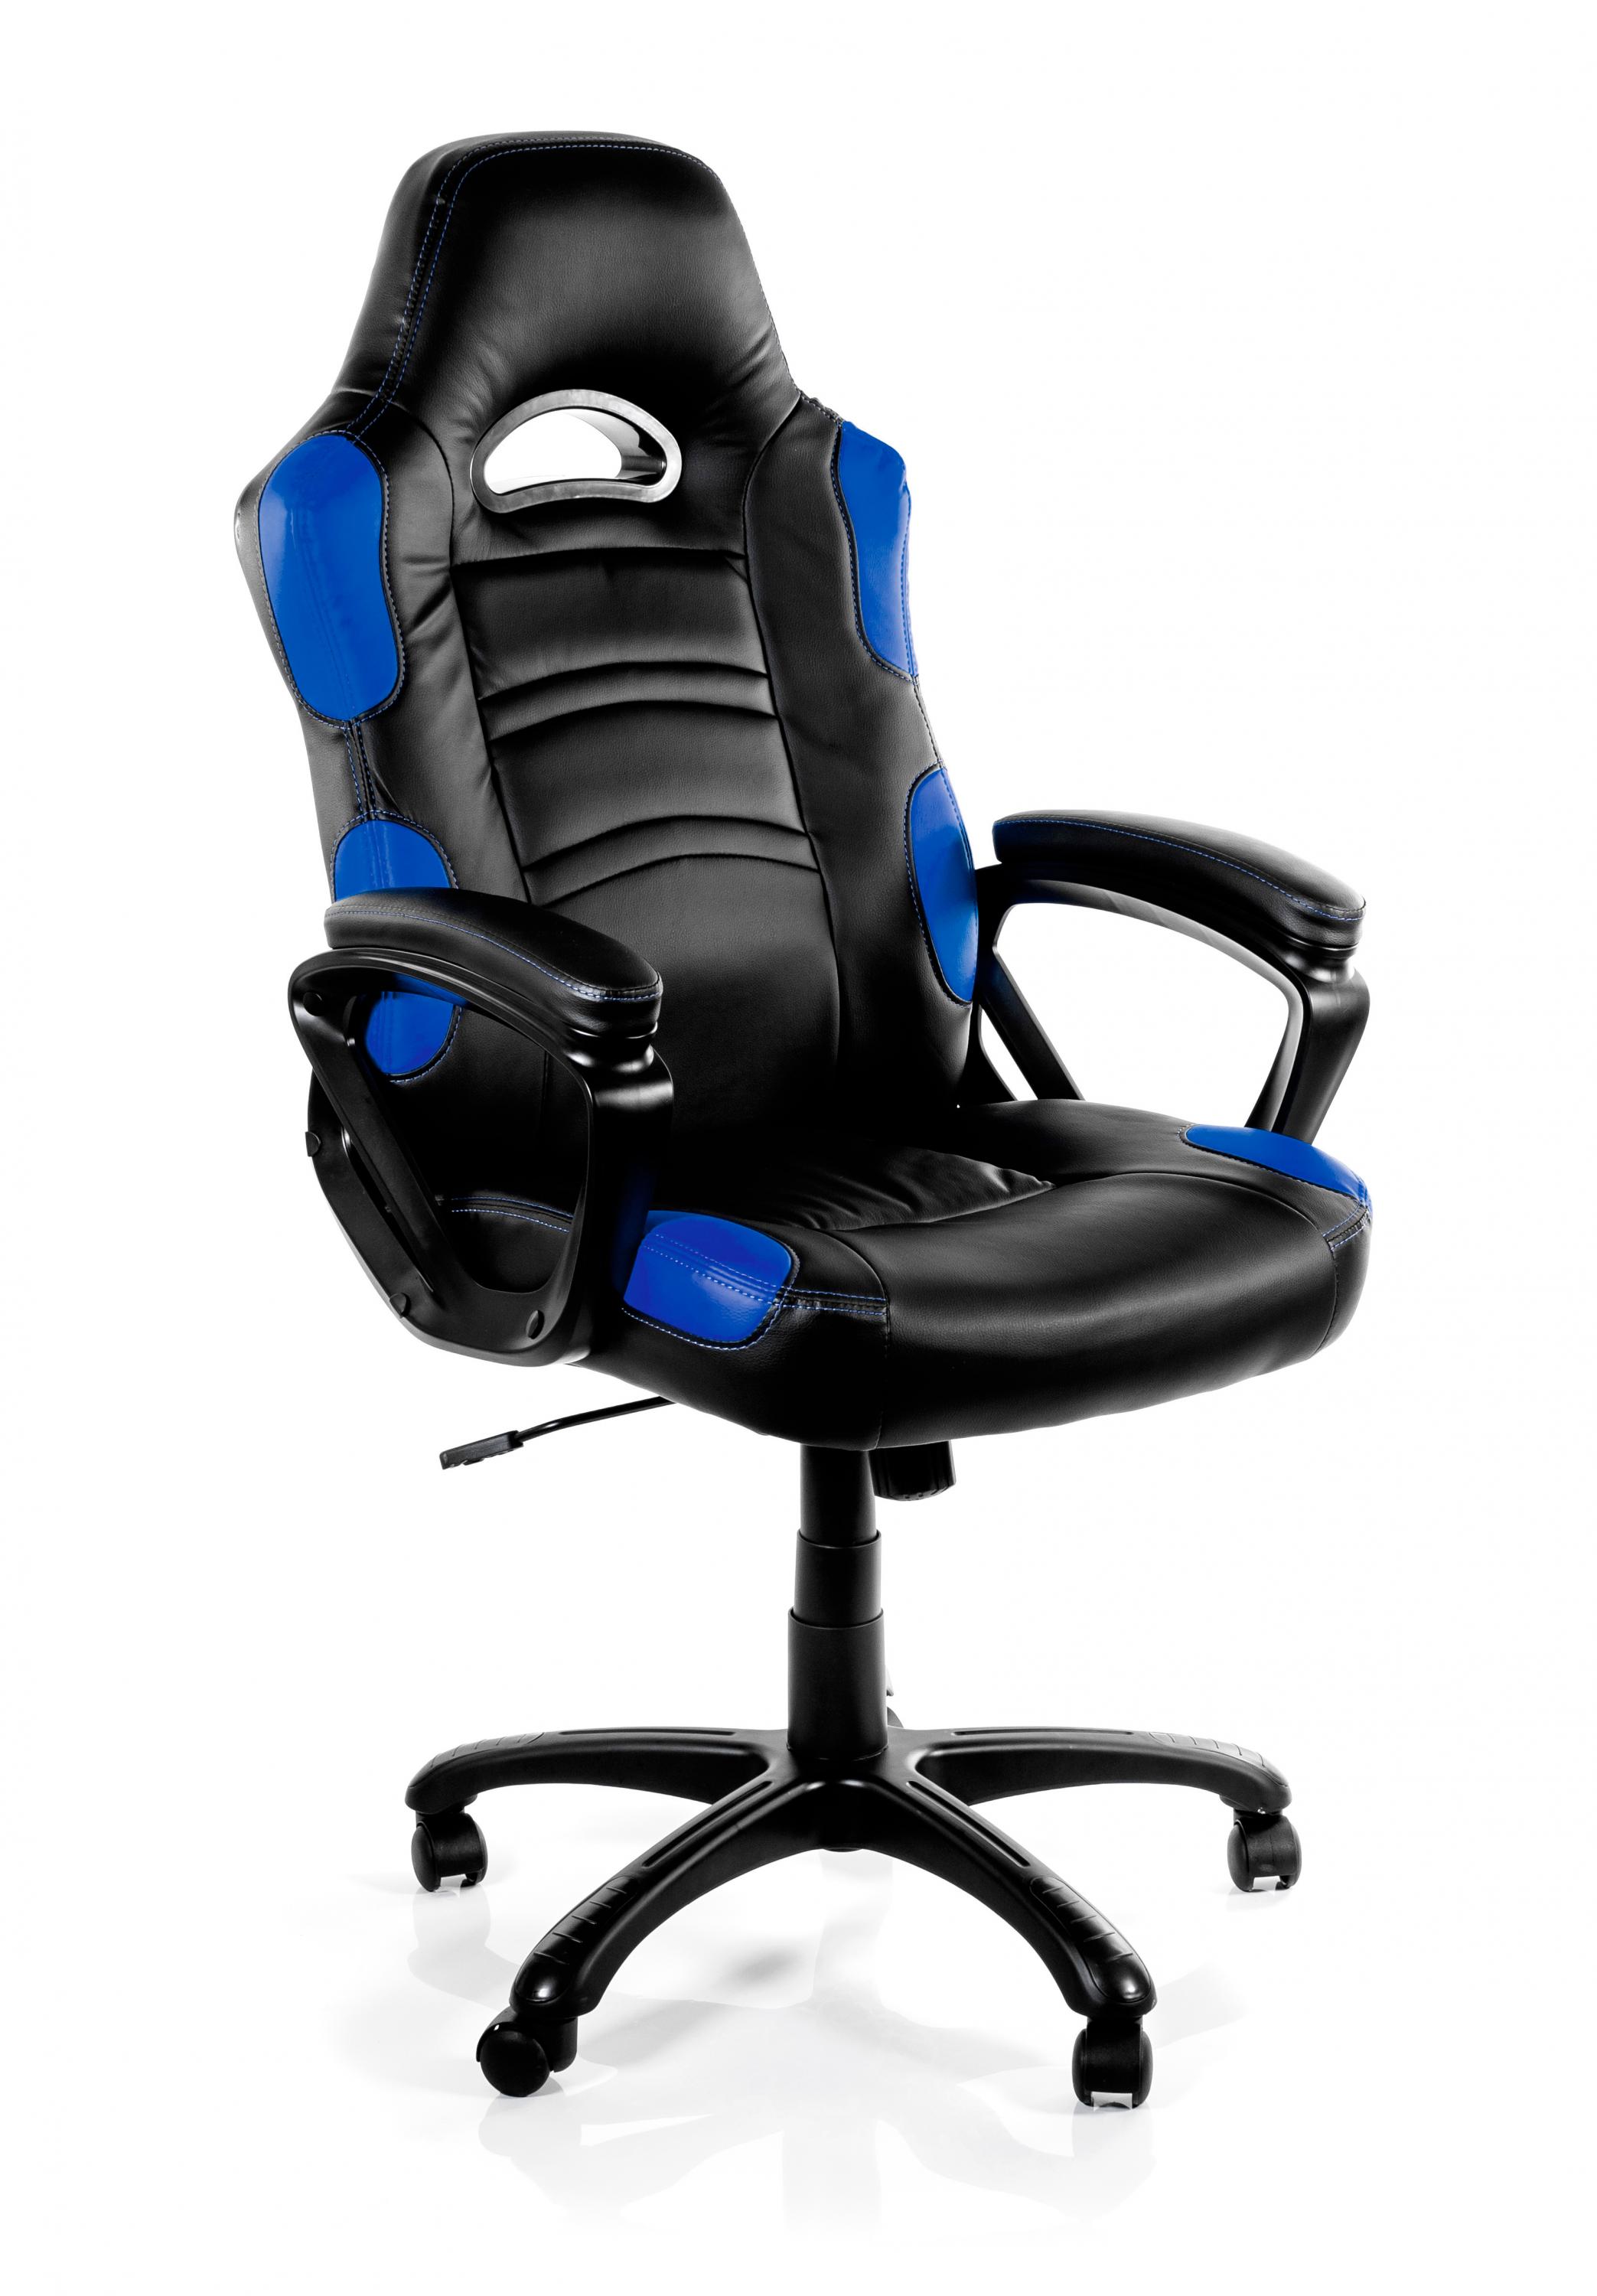 Best Computer Gaming Chair Playstation Bestgaminglaptops | Chair Design